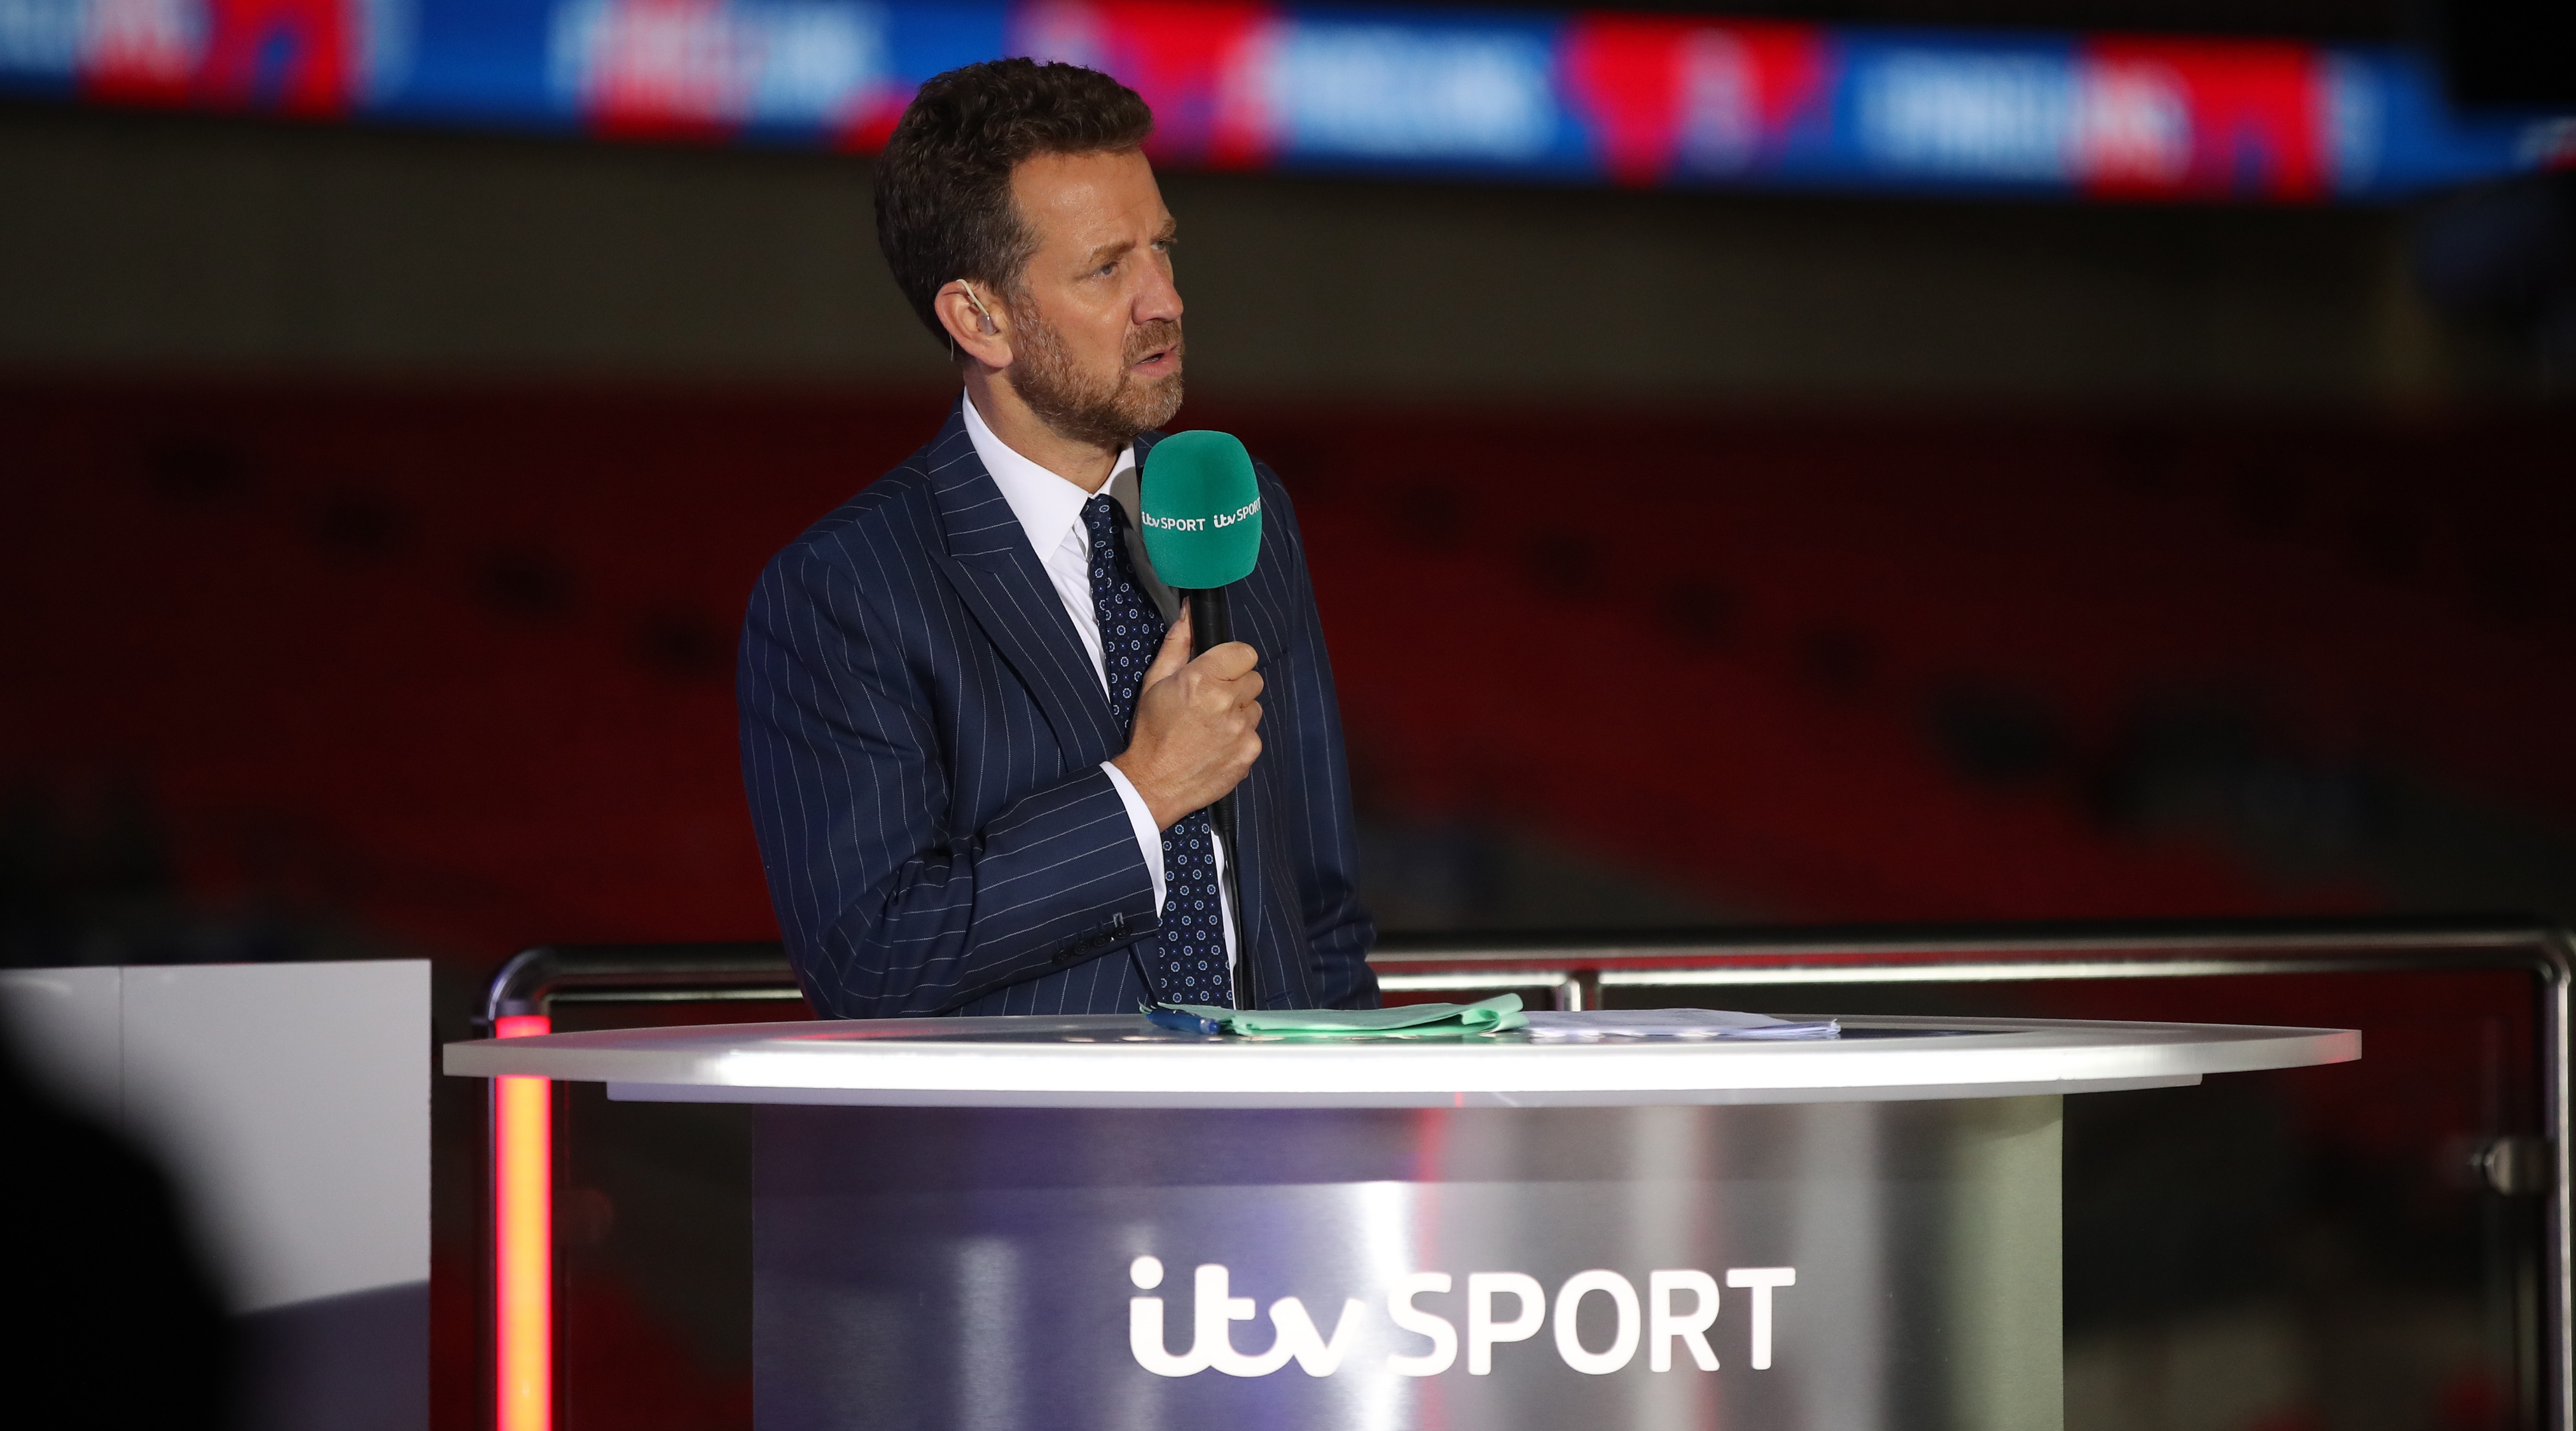 ITV Sport presenter Mark Pougatch looks on following the international friendly match between England and Wales at Wembley Stadium on October 08, 2020 in London, England.